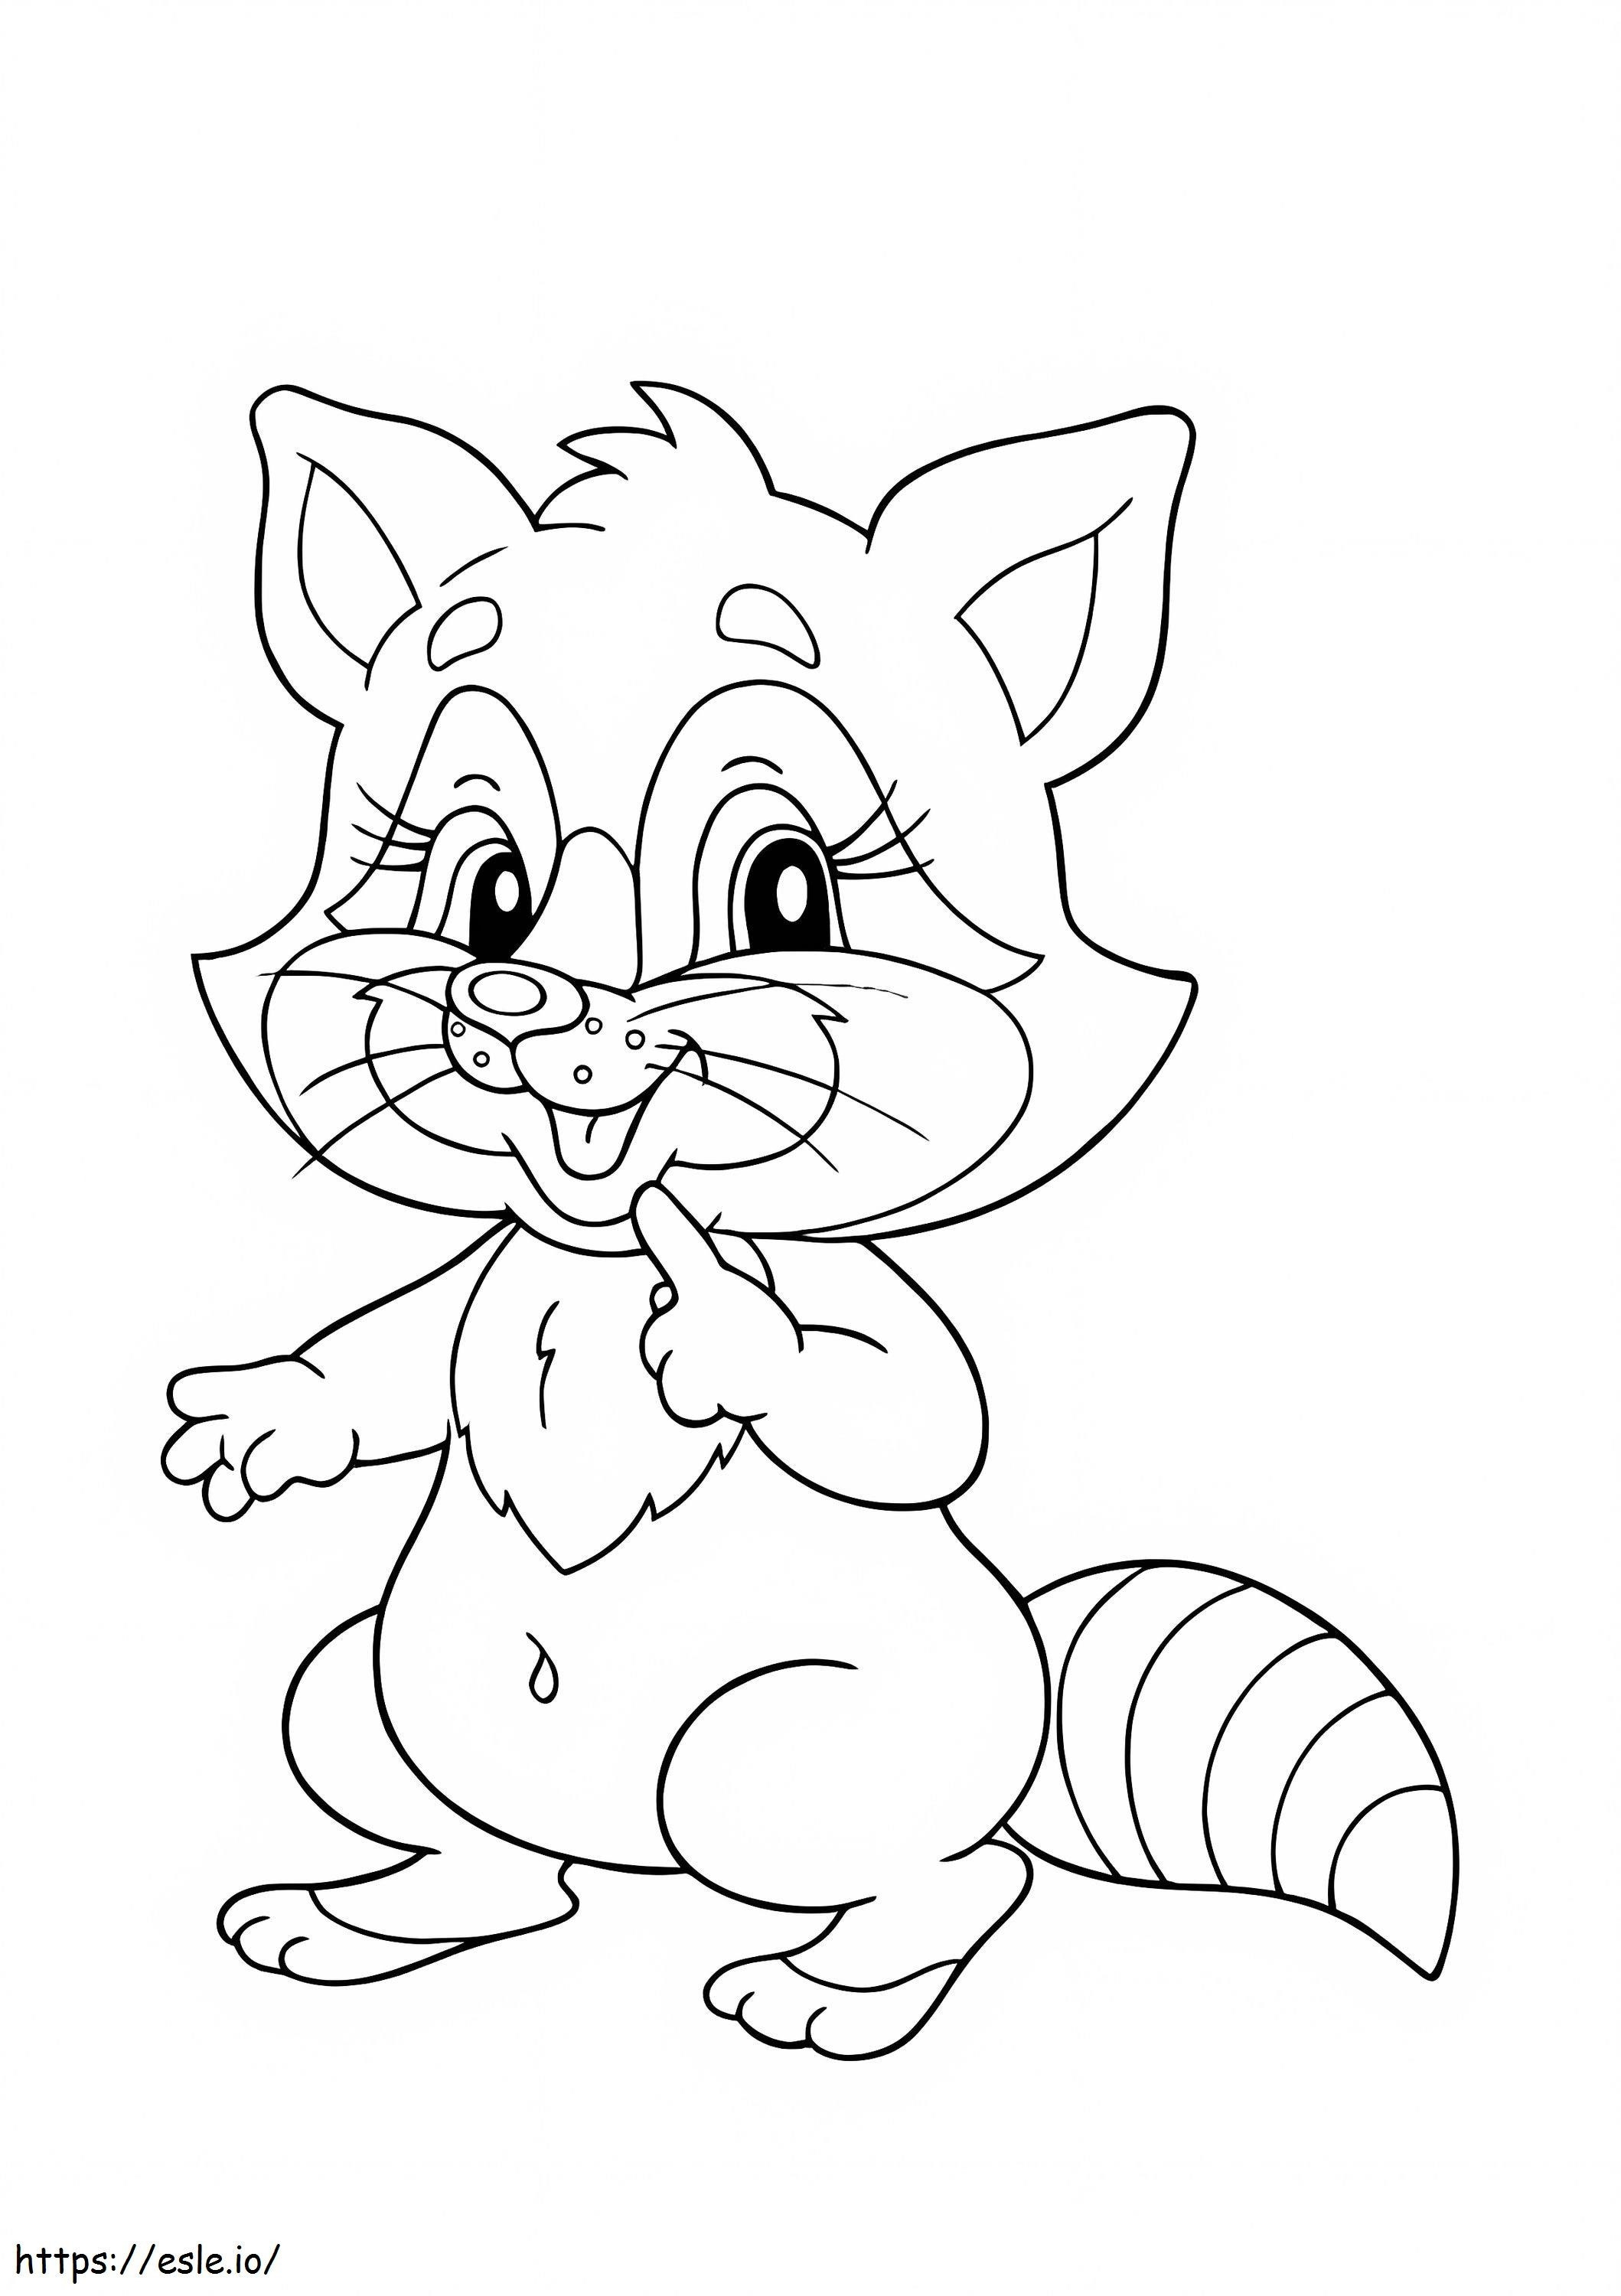 Little Cute Raccoon coloring page